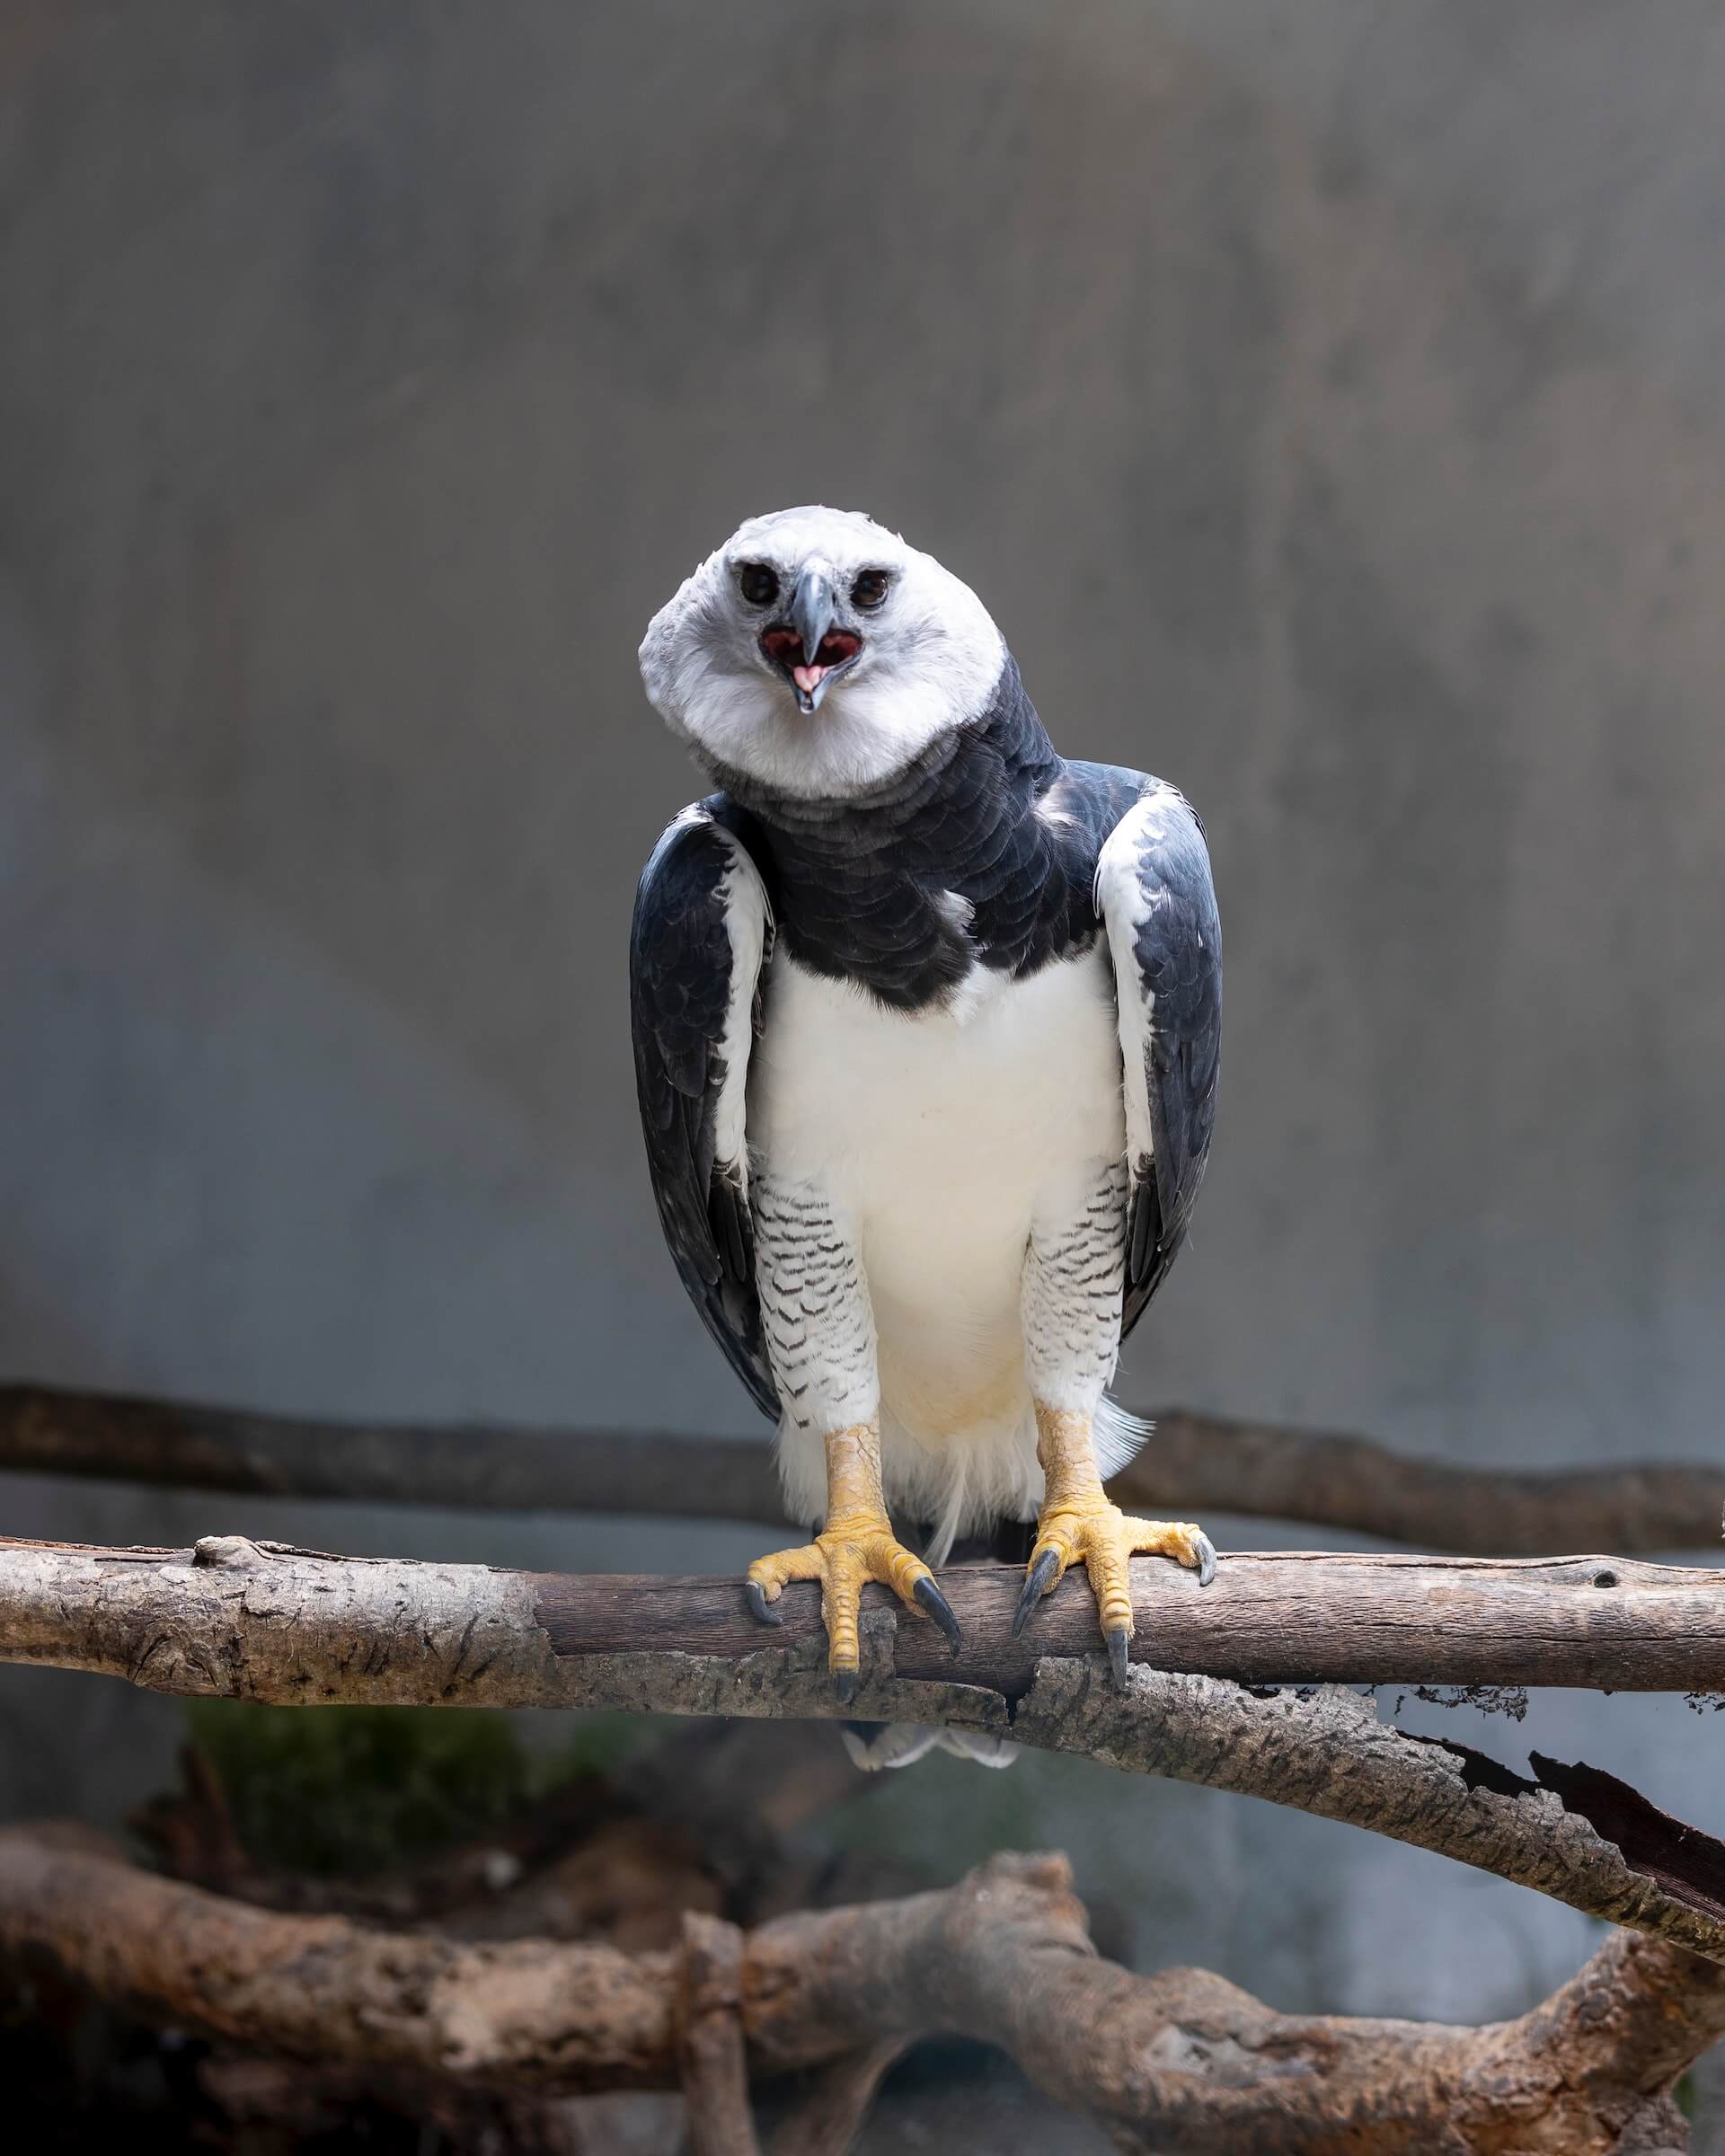 Just How Big and Powerful is the Harpy Eagle? - Avian Report